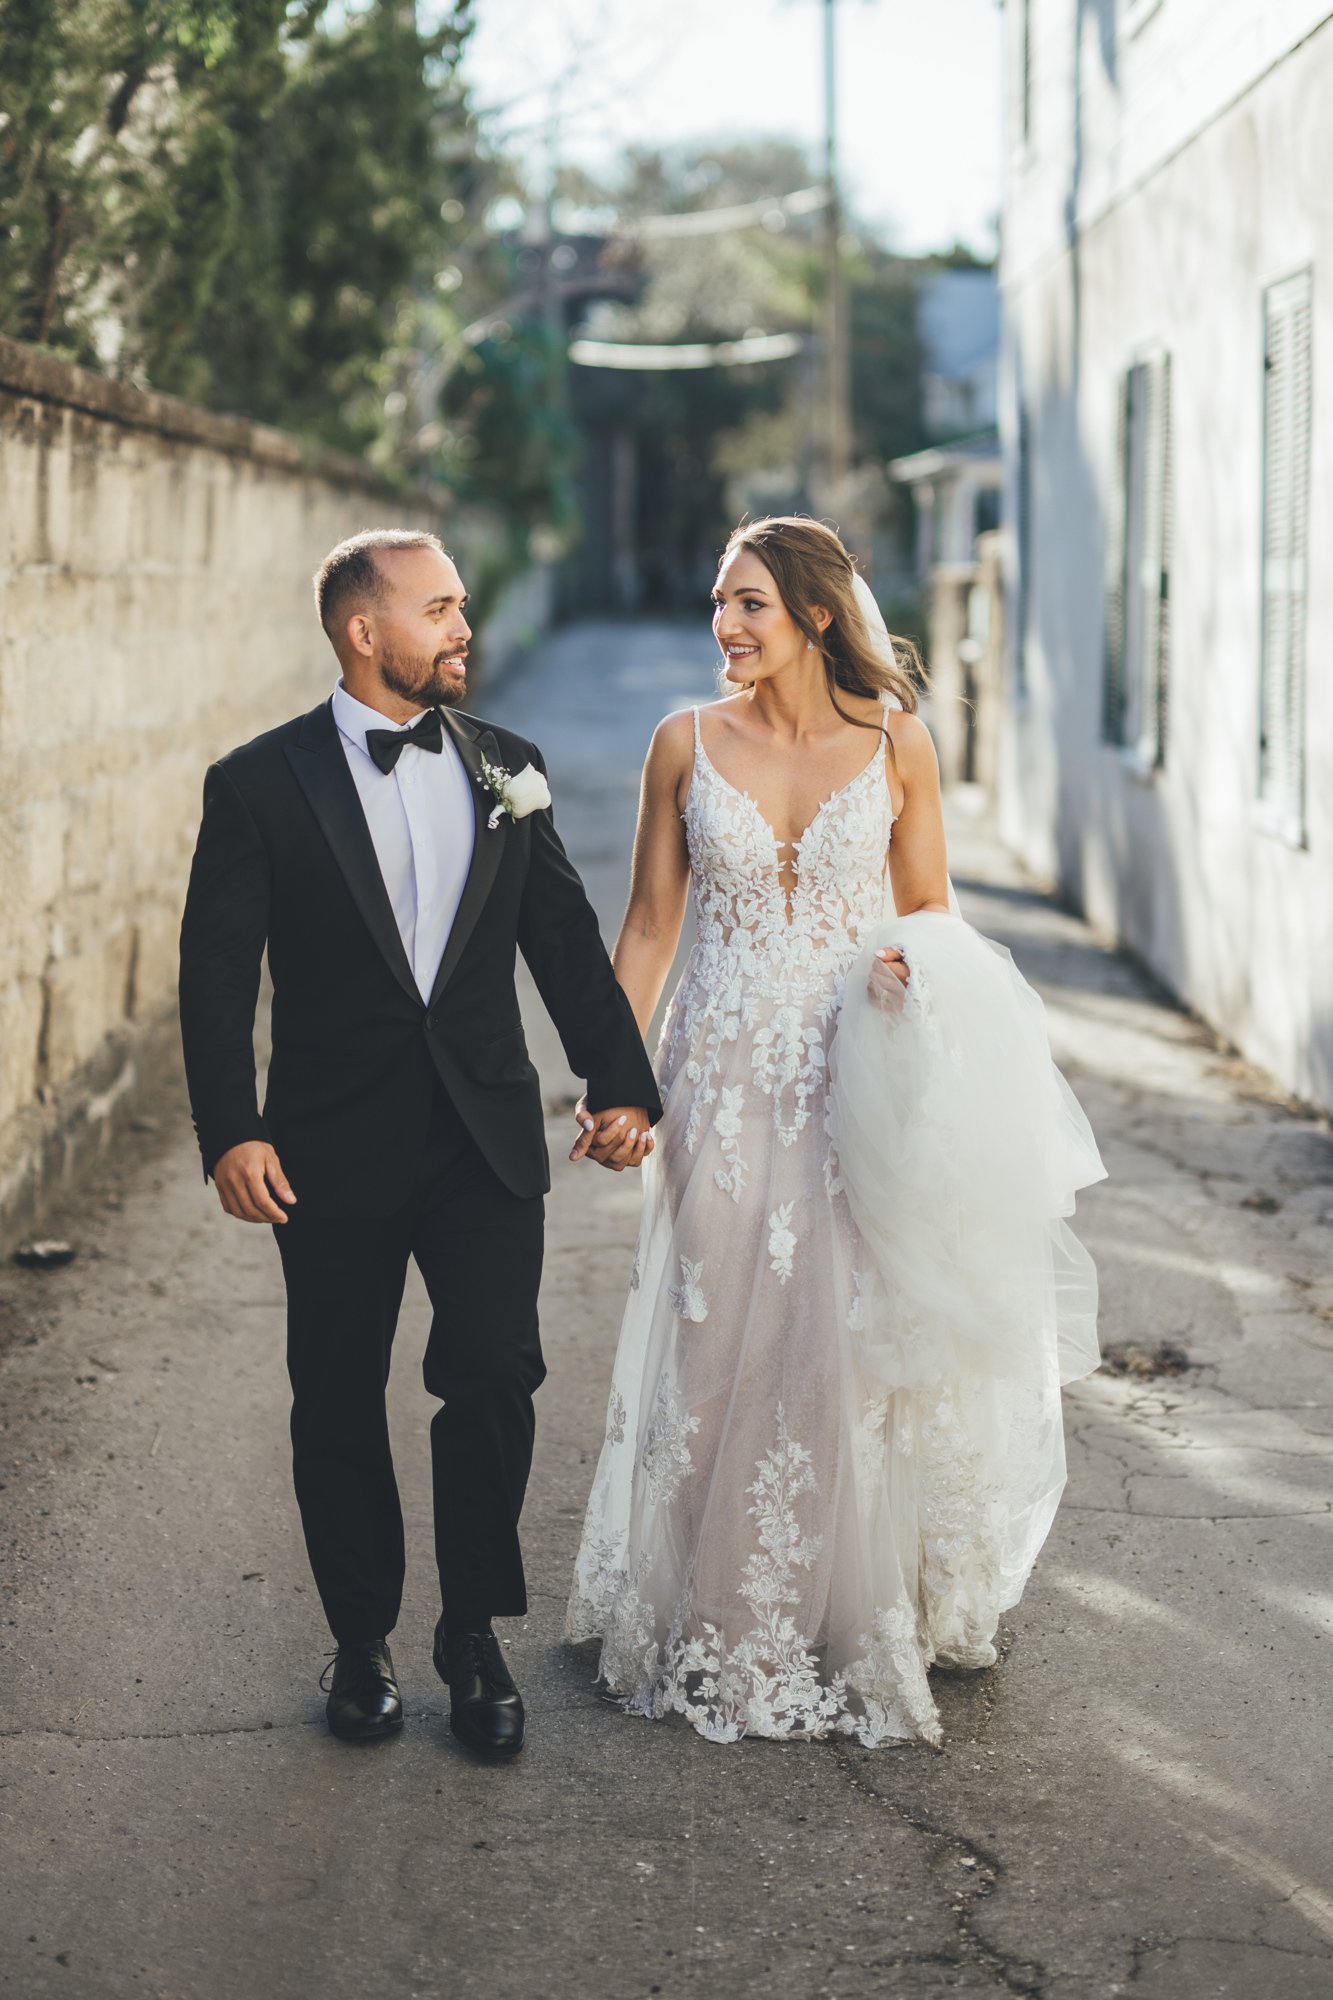 Bow Tie Photo & Video couple admiring each other in alley in St. Augustine, Florida following wedding ceremony for bridal portraits2.jpg